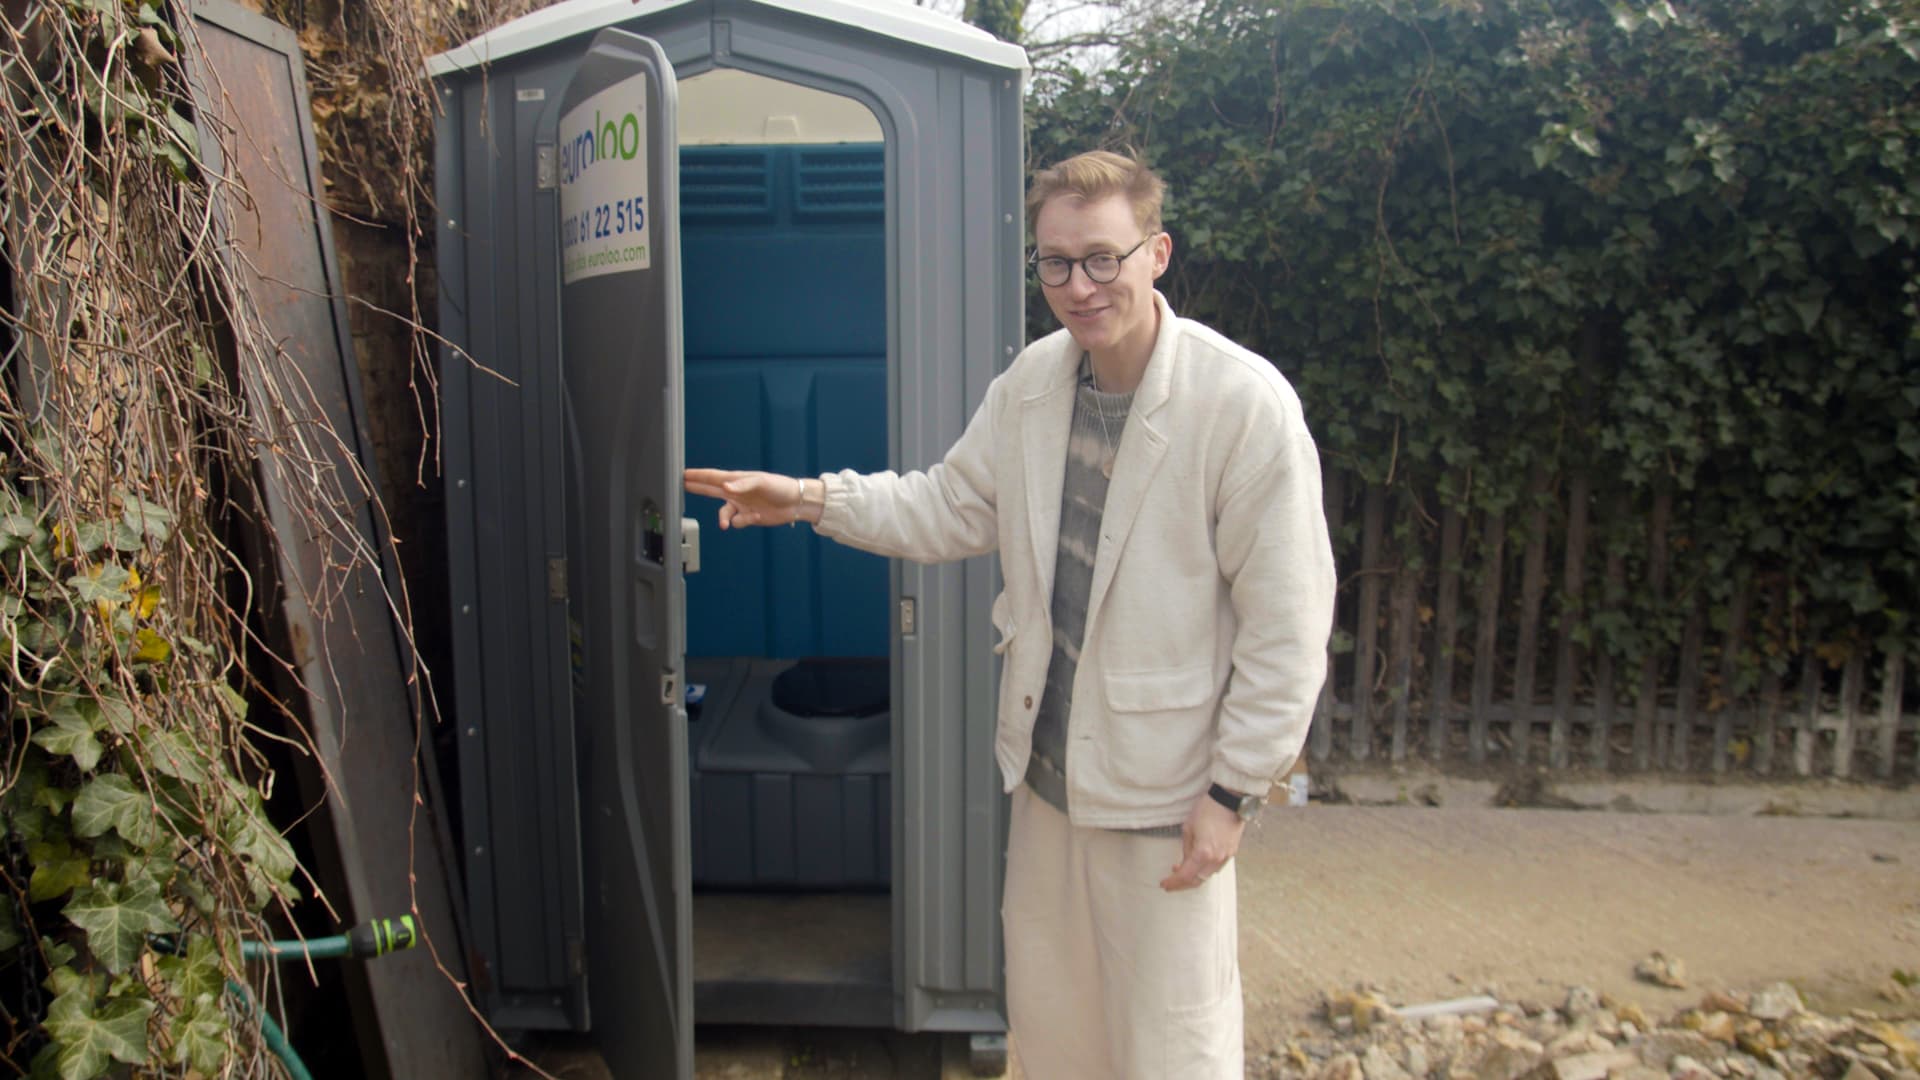 Harrison's toilet is outside of the tiny home.